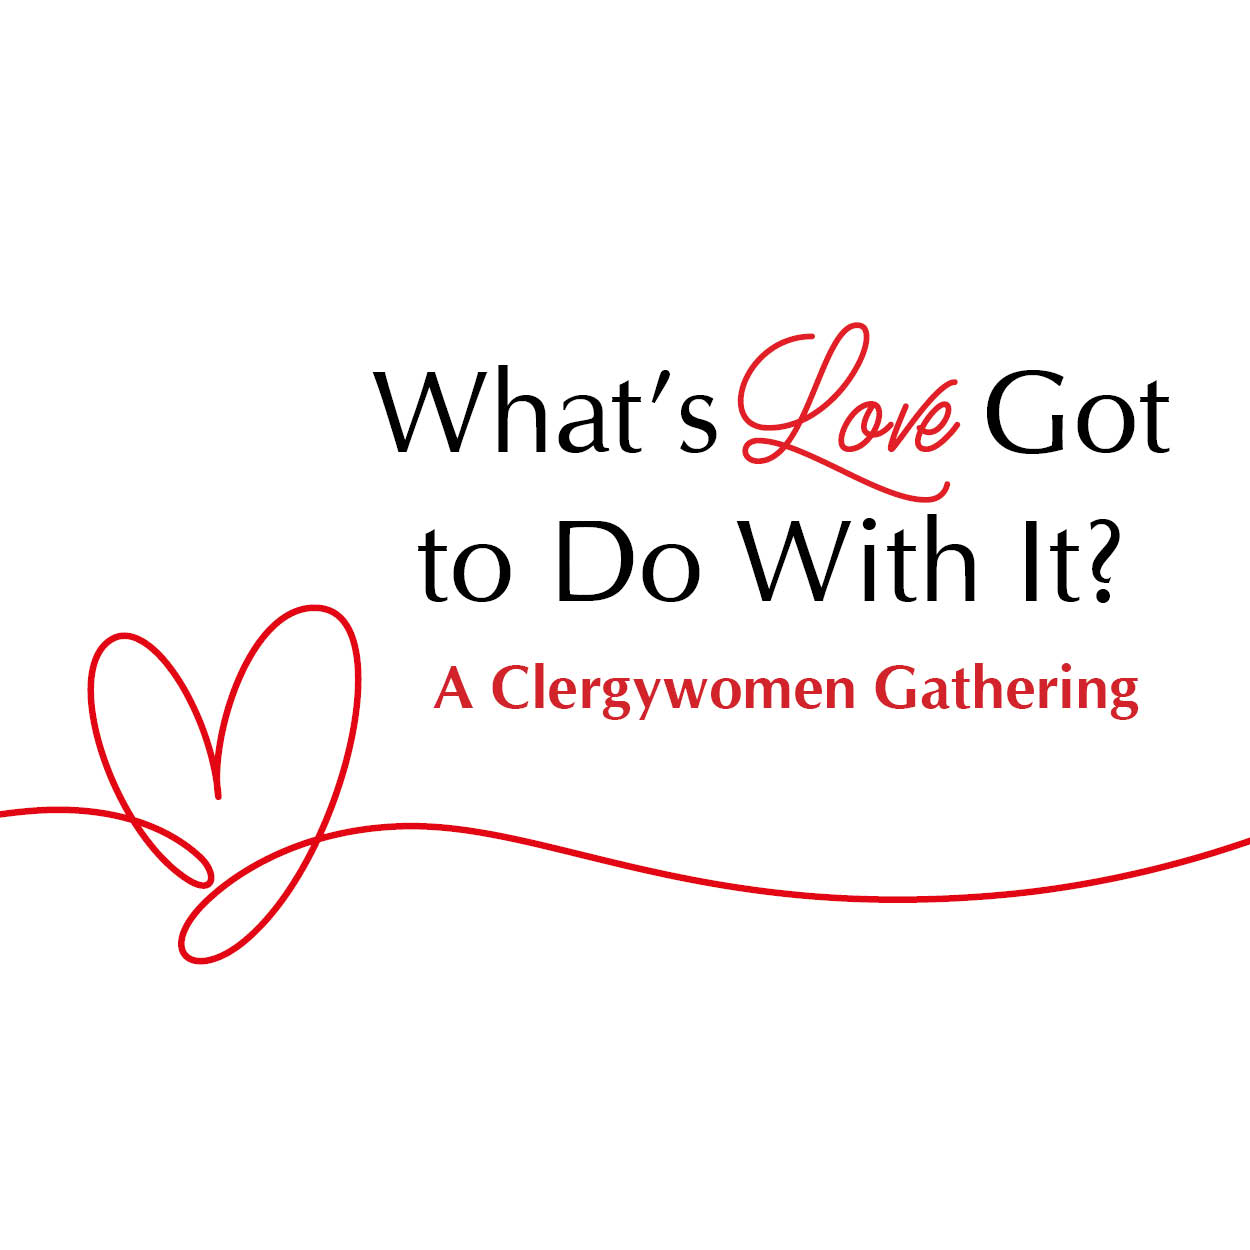 &quot;What's Love Got to Do With It?&quot; A Clergywomen Gathering